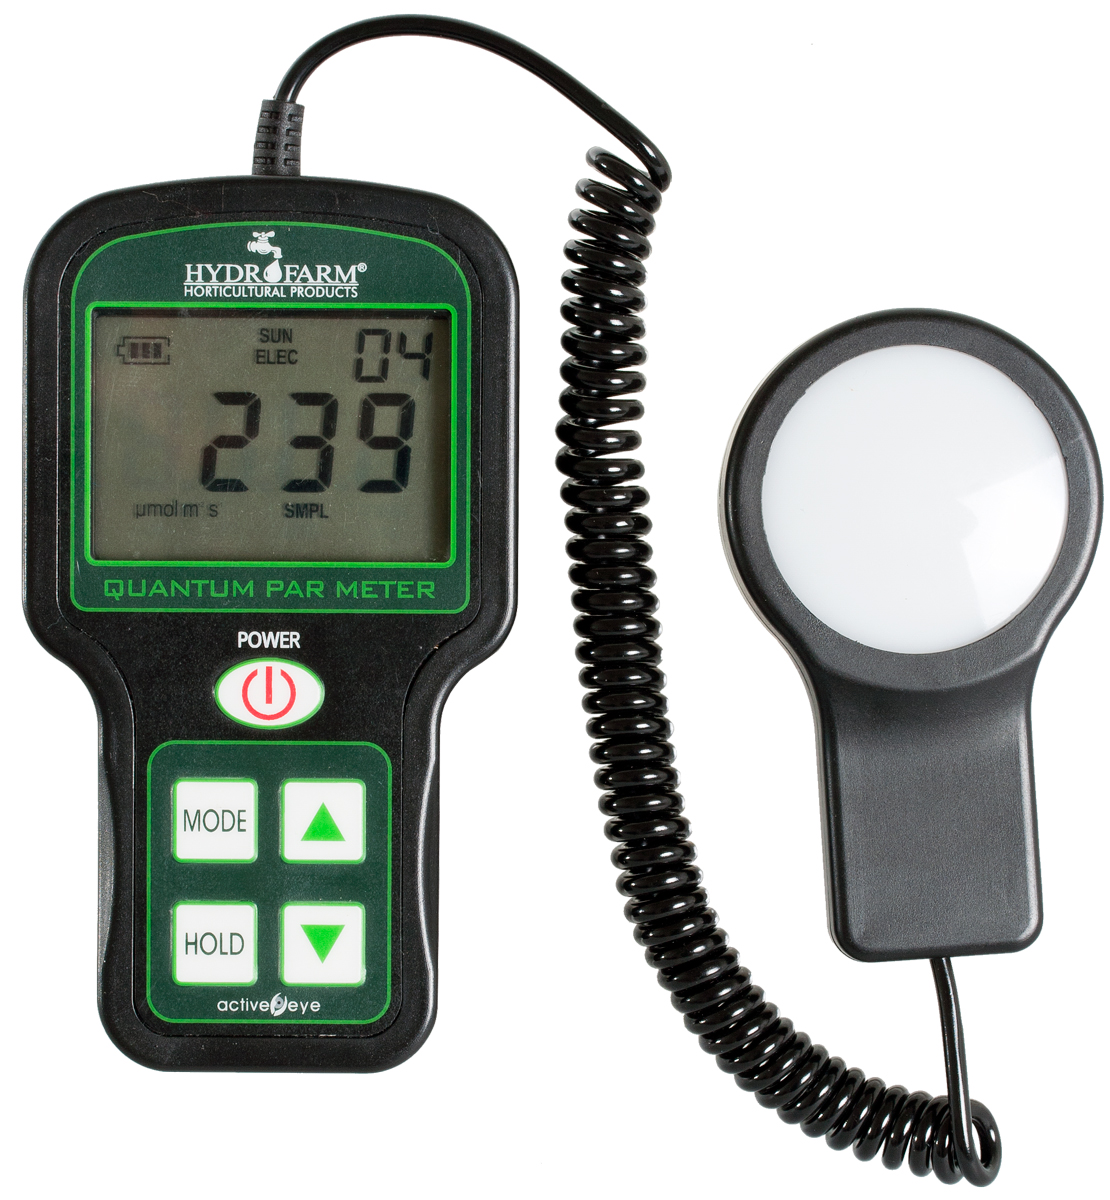 Active Eye Analogue Light Meter Grow Room Accessory Hydroponics 